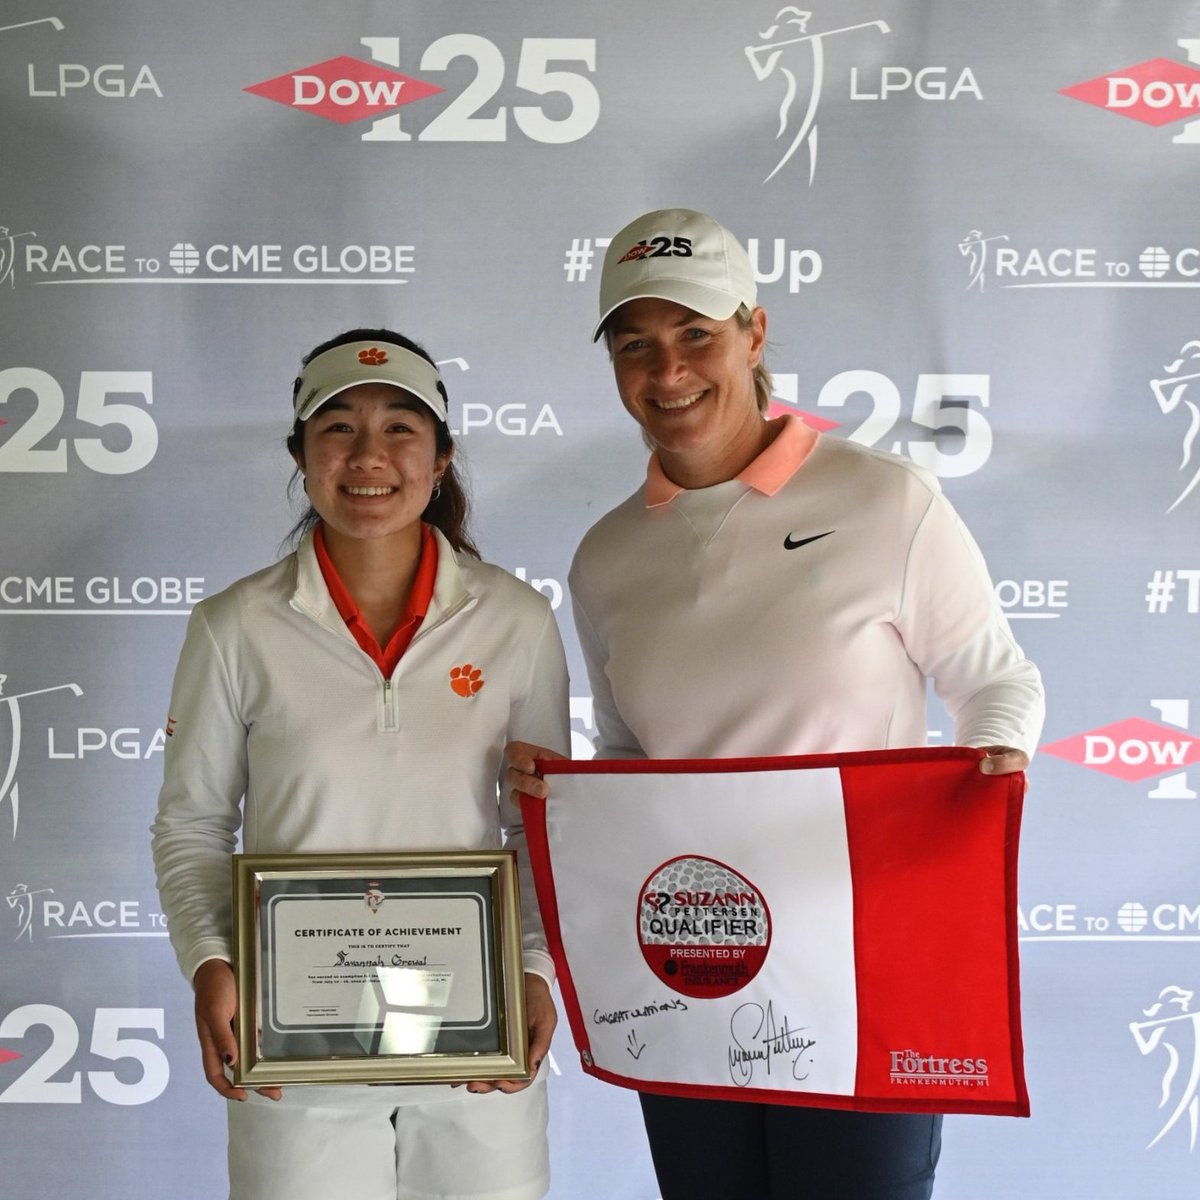 2022 ➡️ Savannah Grewal wins the Suzann Pettersen Amateur Qualifier and #TeamsUp with Annabelle Pancake

2023 ➡️ Annabelle Pancake wins the Suzann Pettersen Amateur Qualifier and #TeamsUp with Savannah Grewal

Pancake & Grewal currently sit T18 at the Dow GLBI! 👏